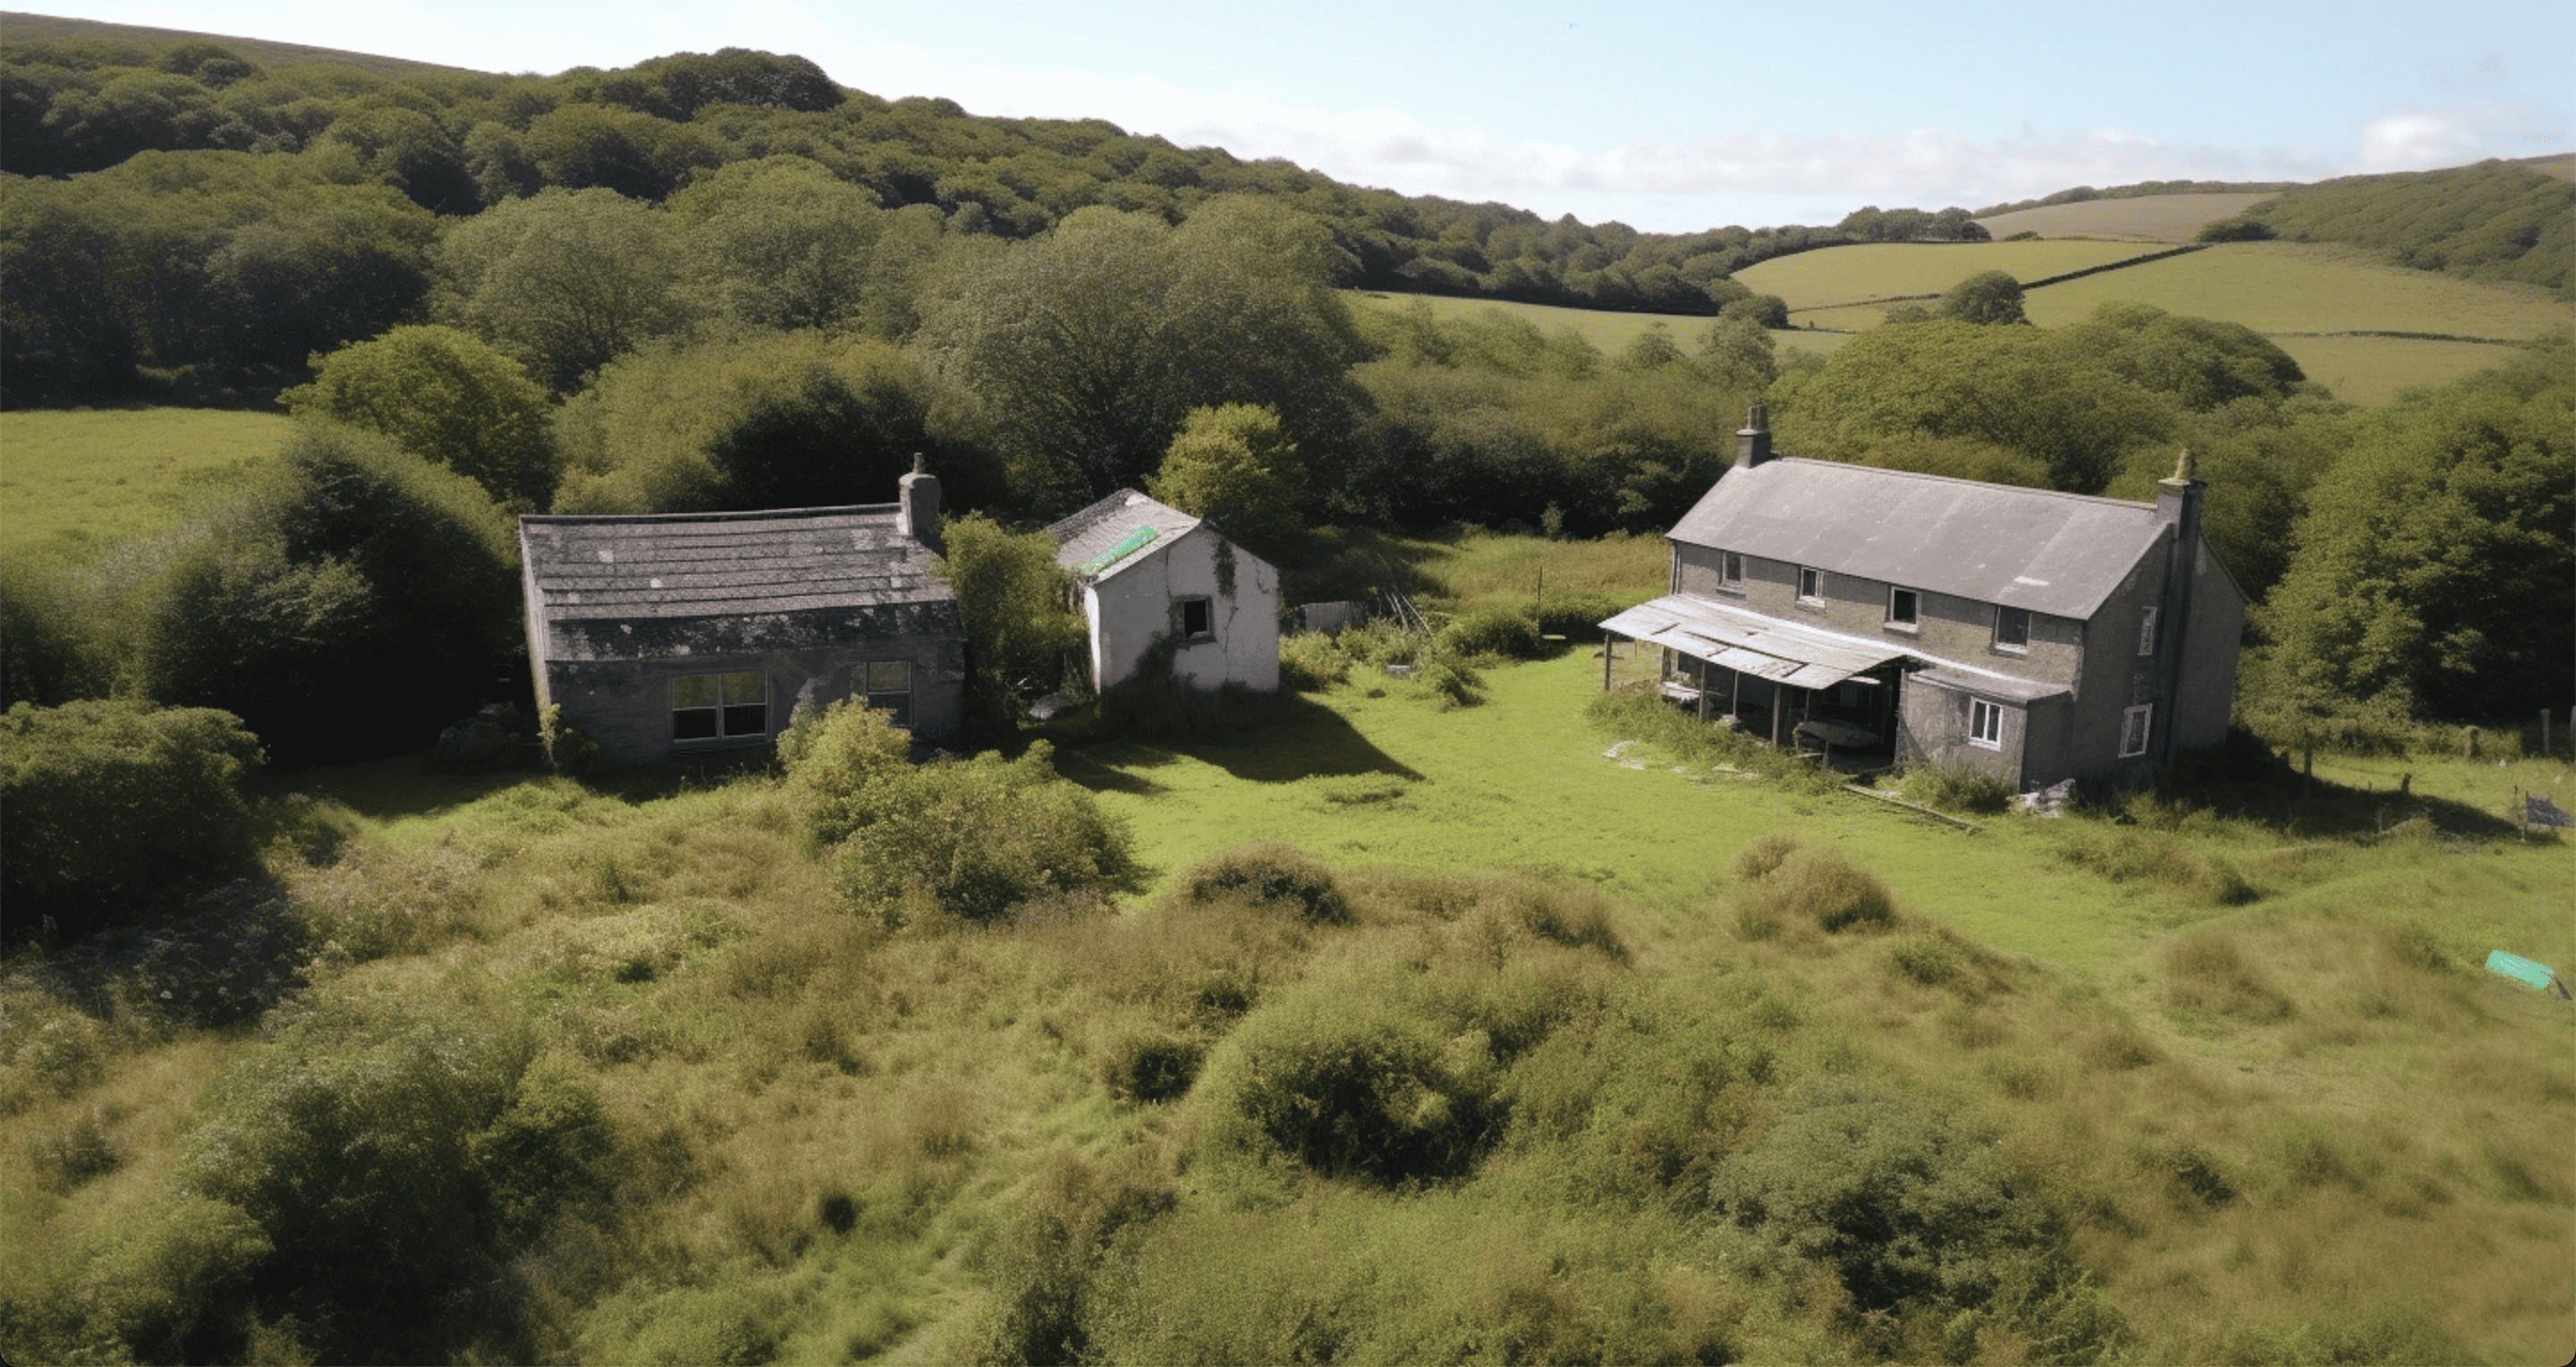 Smallholding for sale in the UK